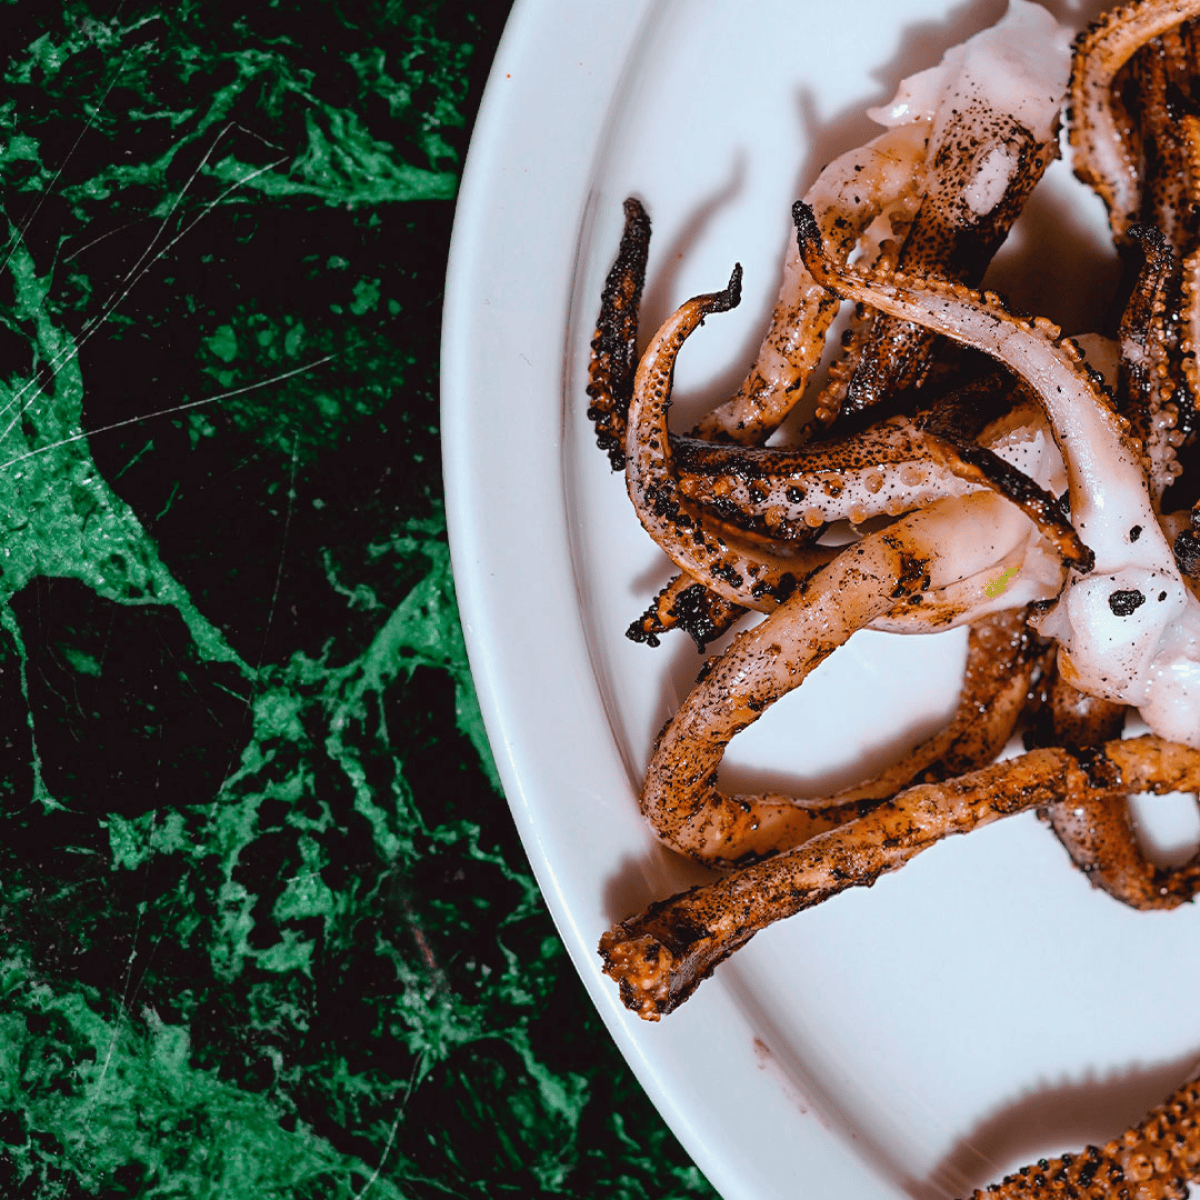 Squid in a white plate on a green background.